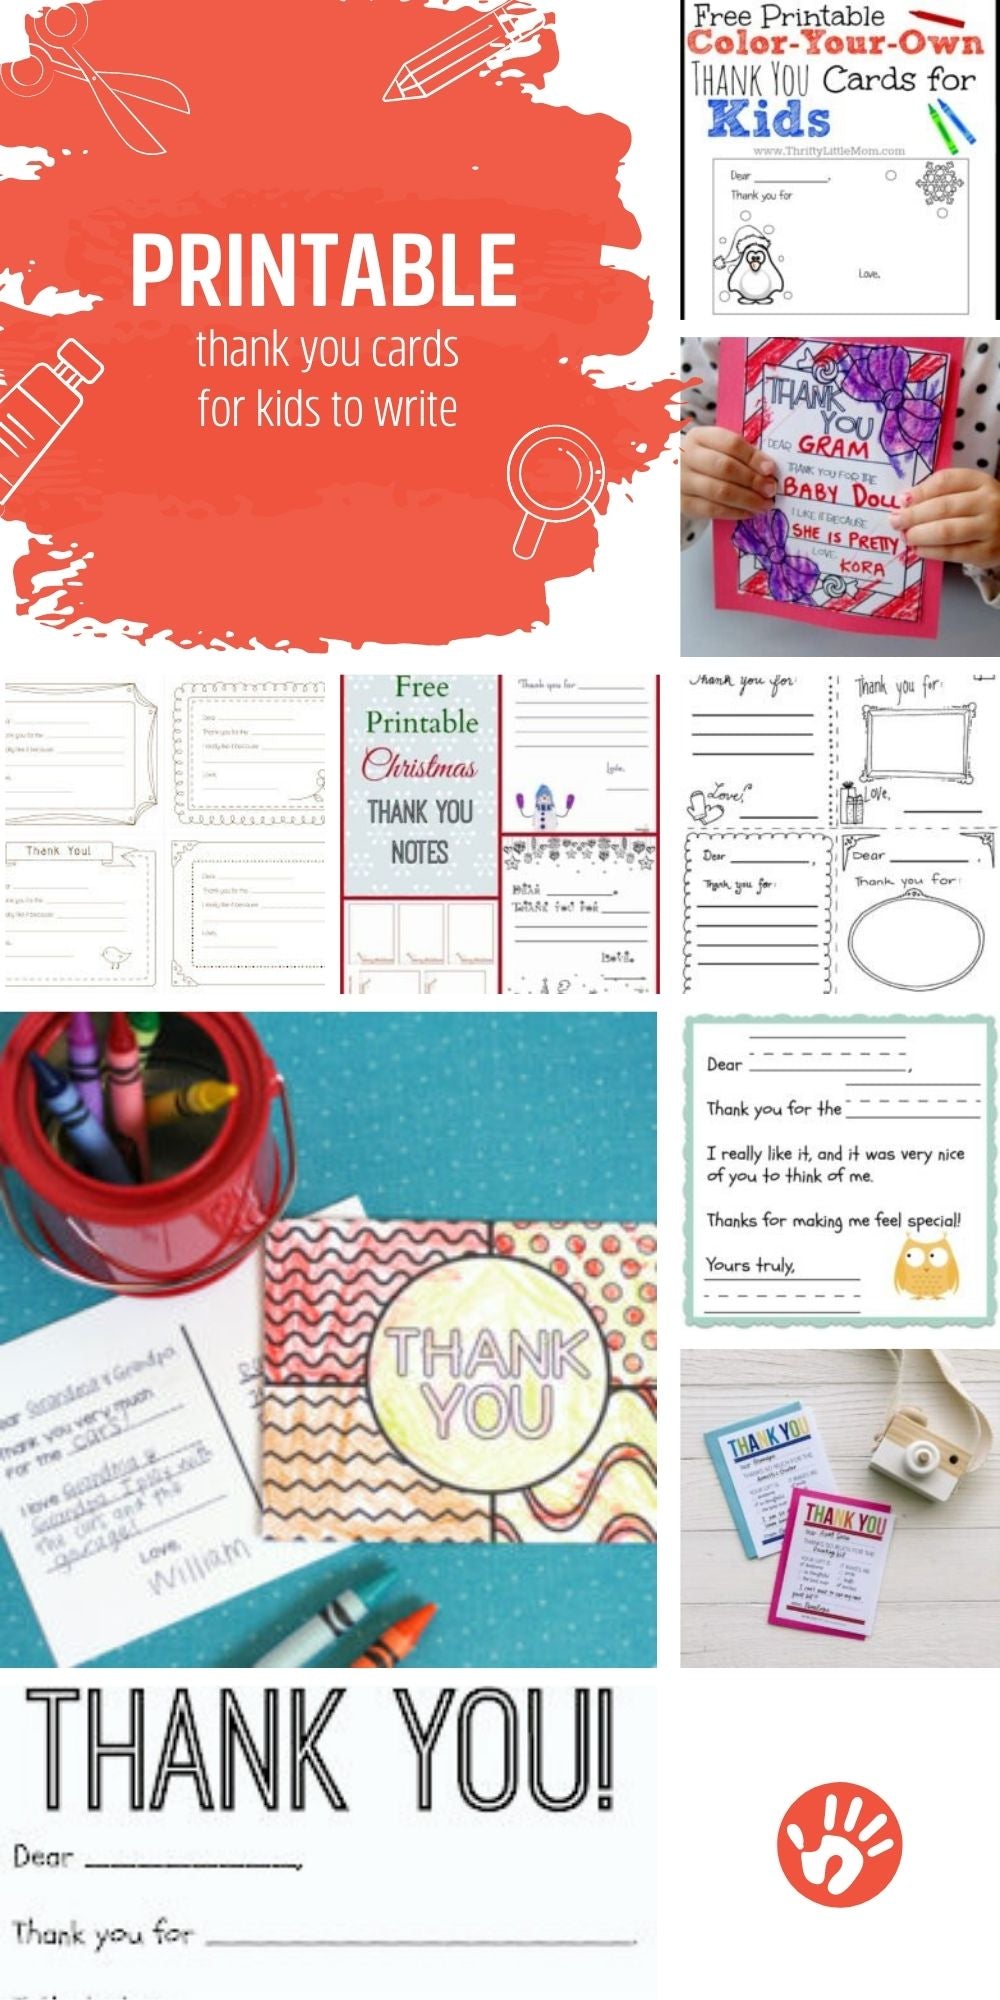 Adorable Printable Thank You Cards for Kids to Write